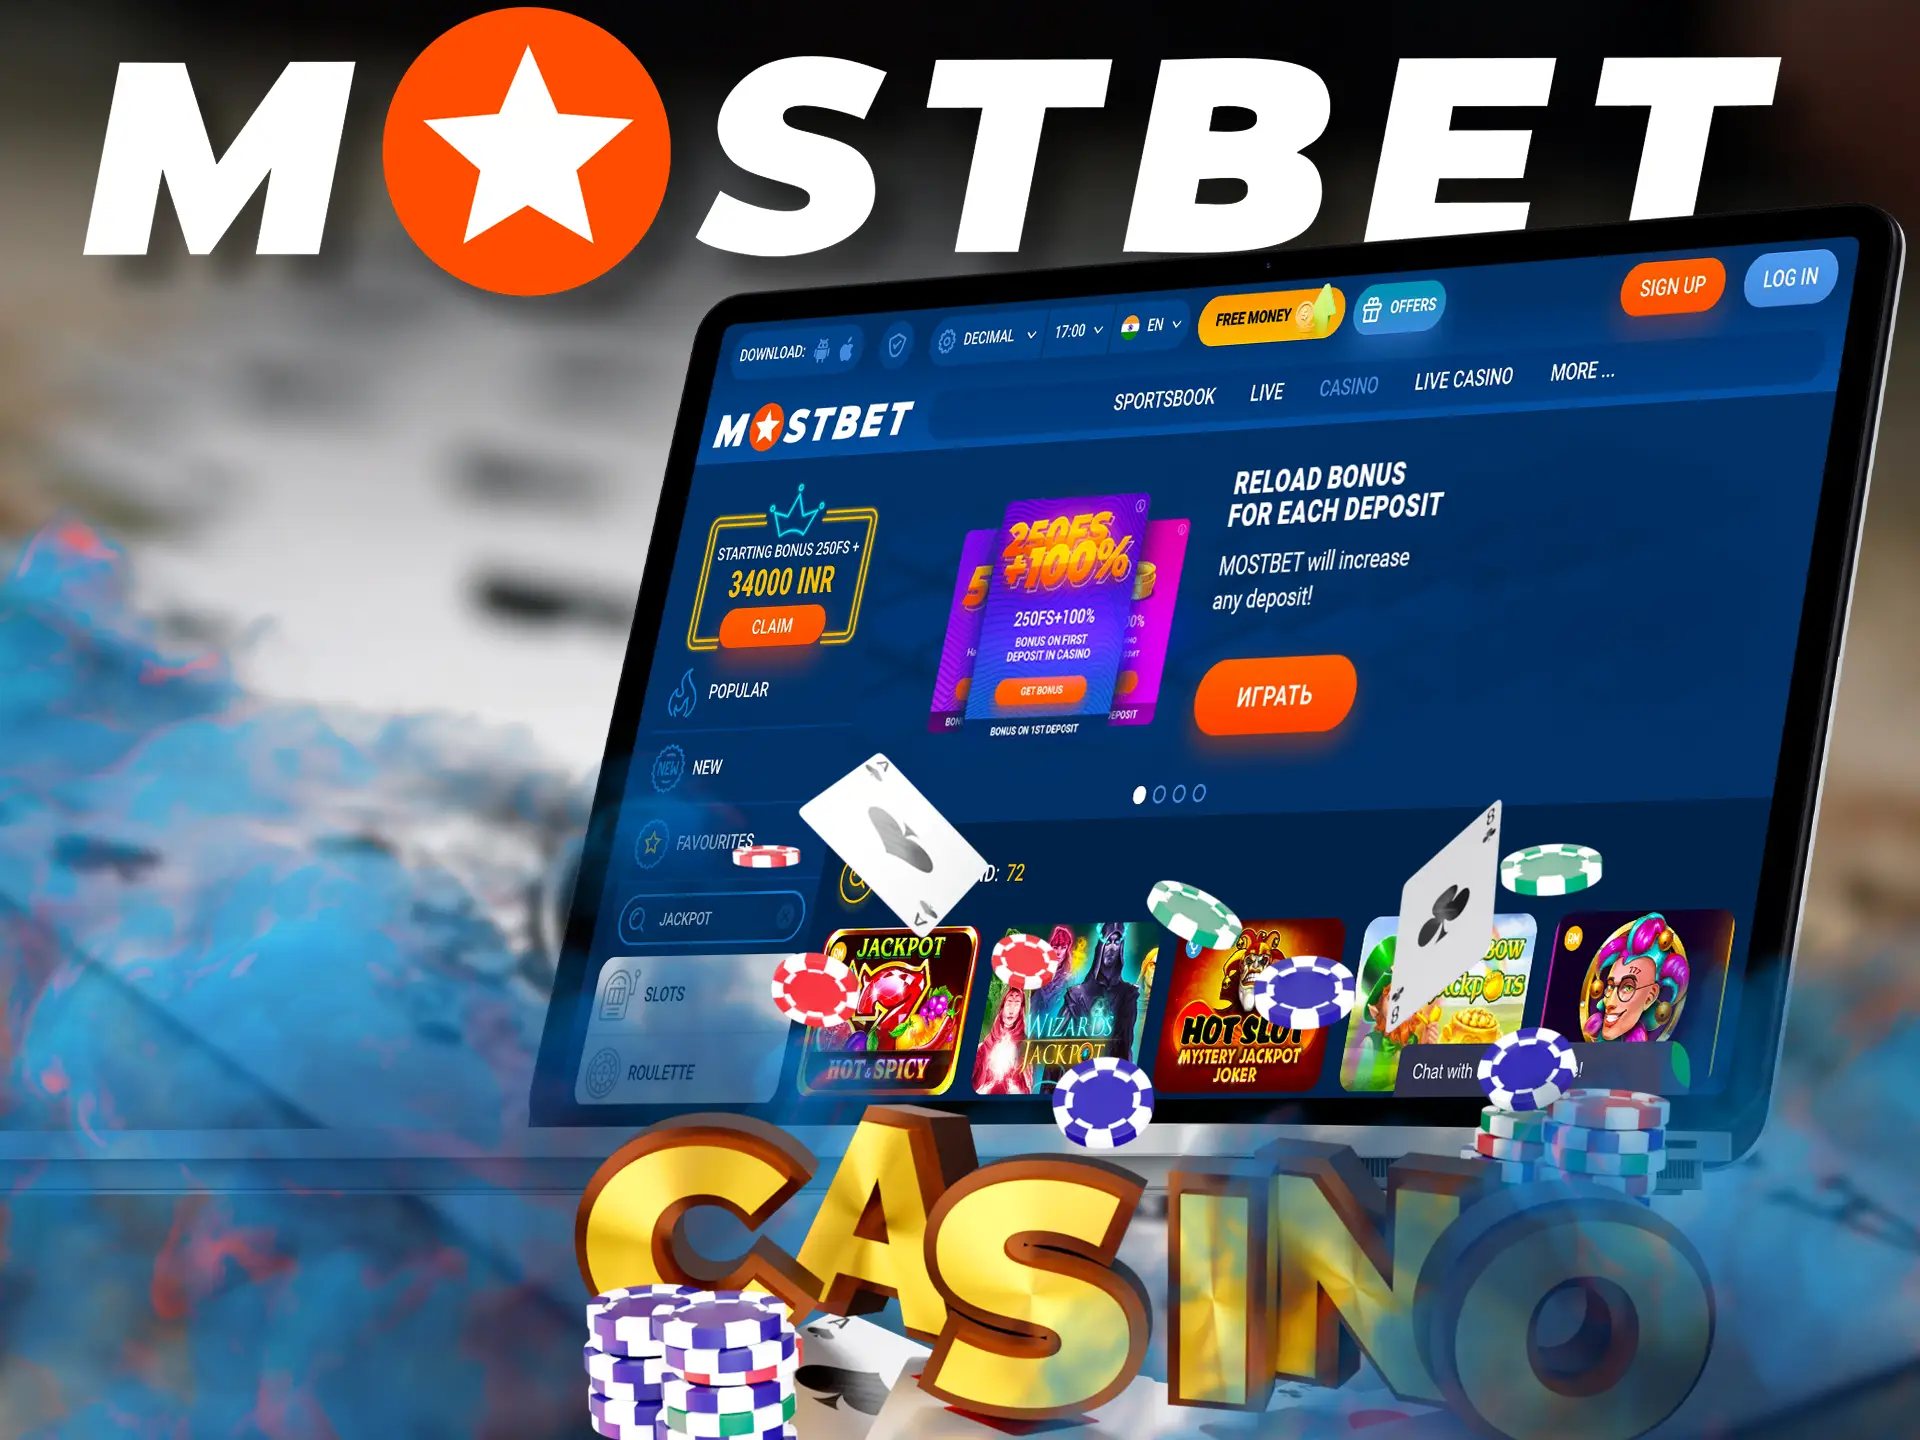 Fair odds are available, which increases the chances of success on the Mostbet platform.